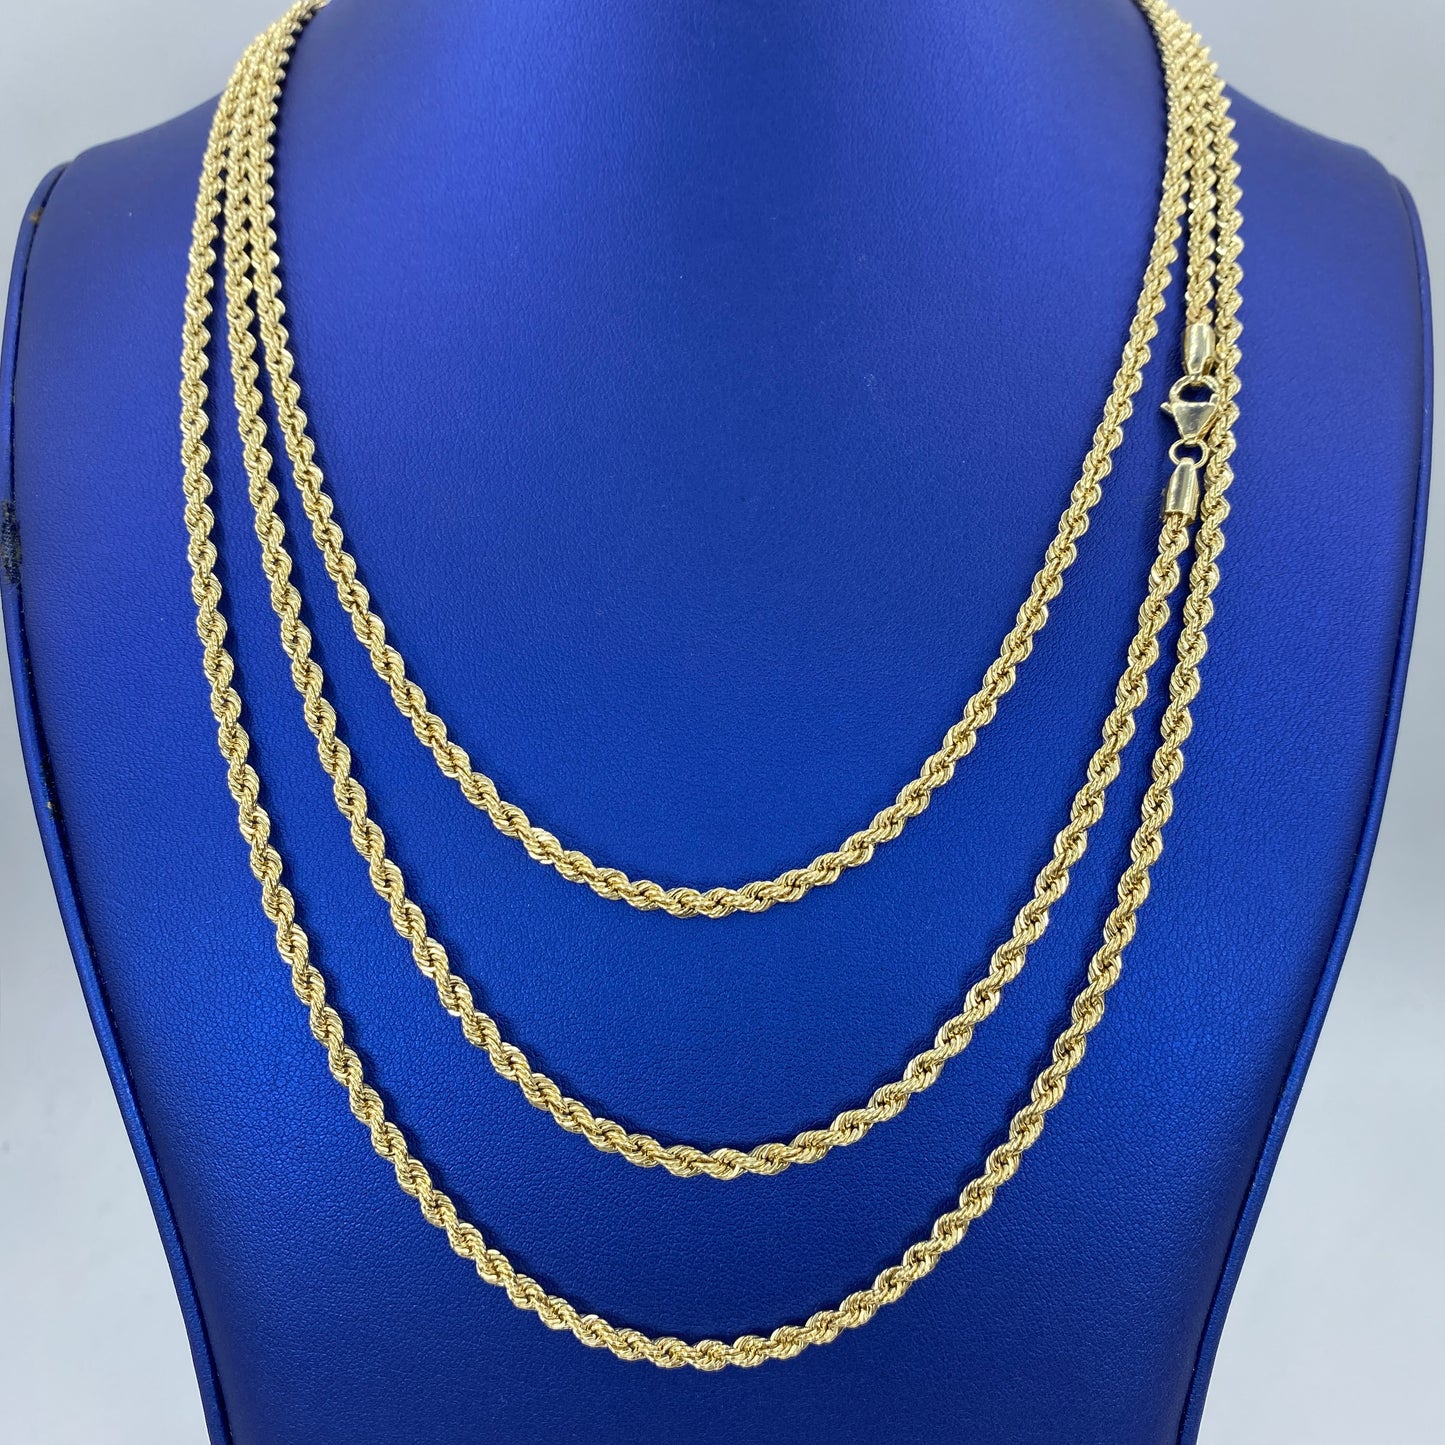 Rope Chain Necklace Real 14K Yellow Gold 16-24"